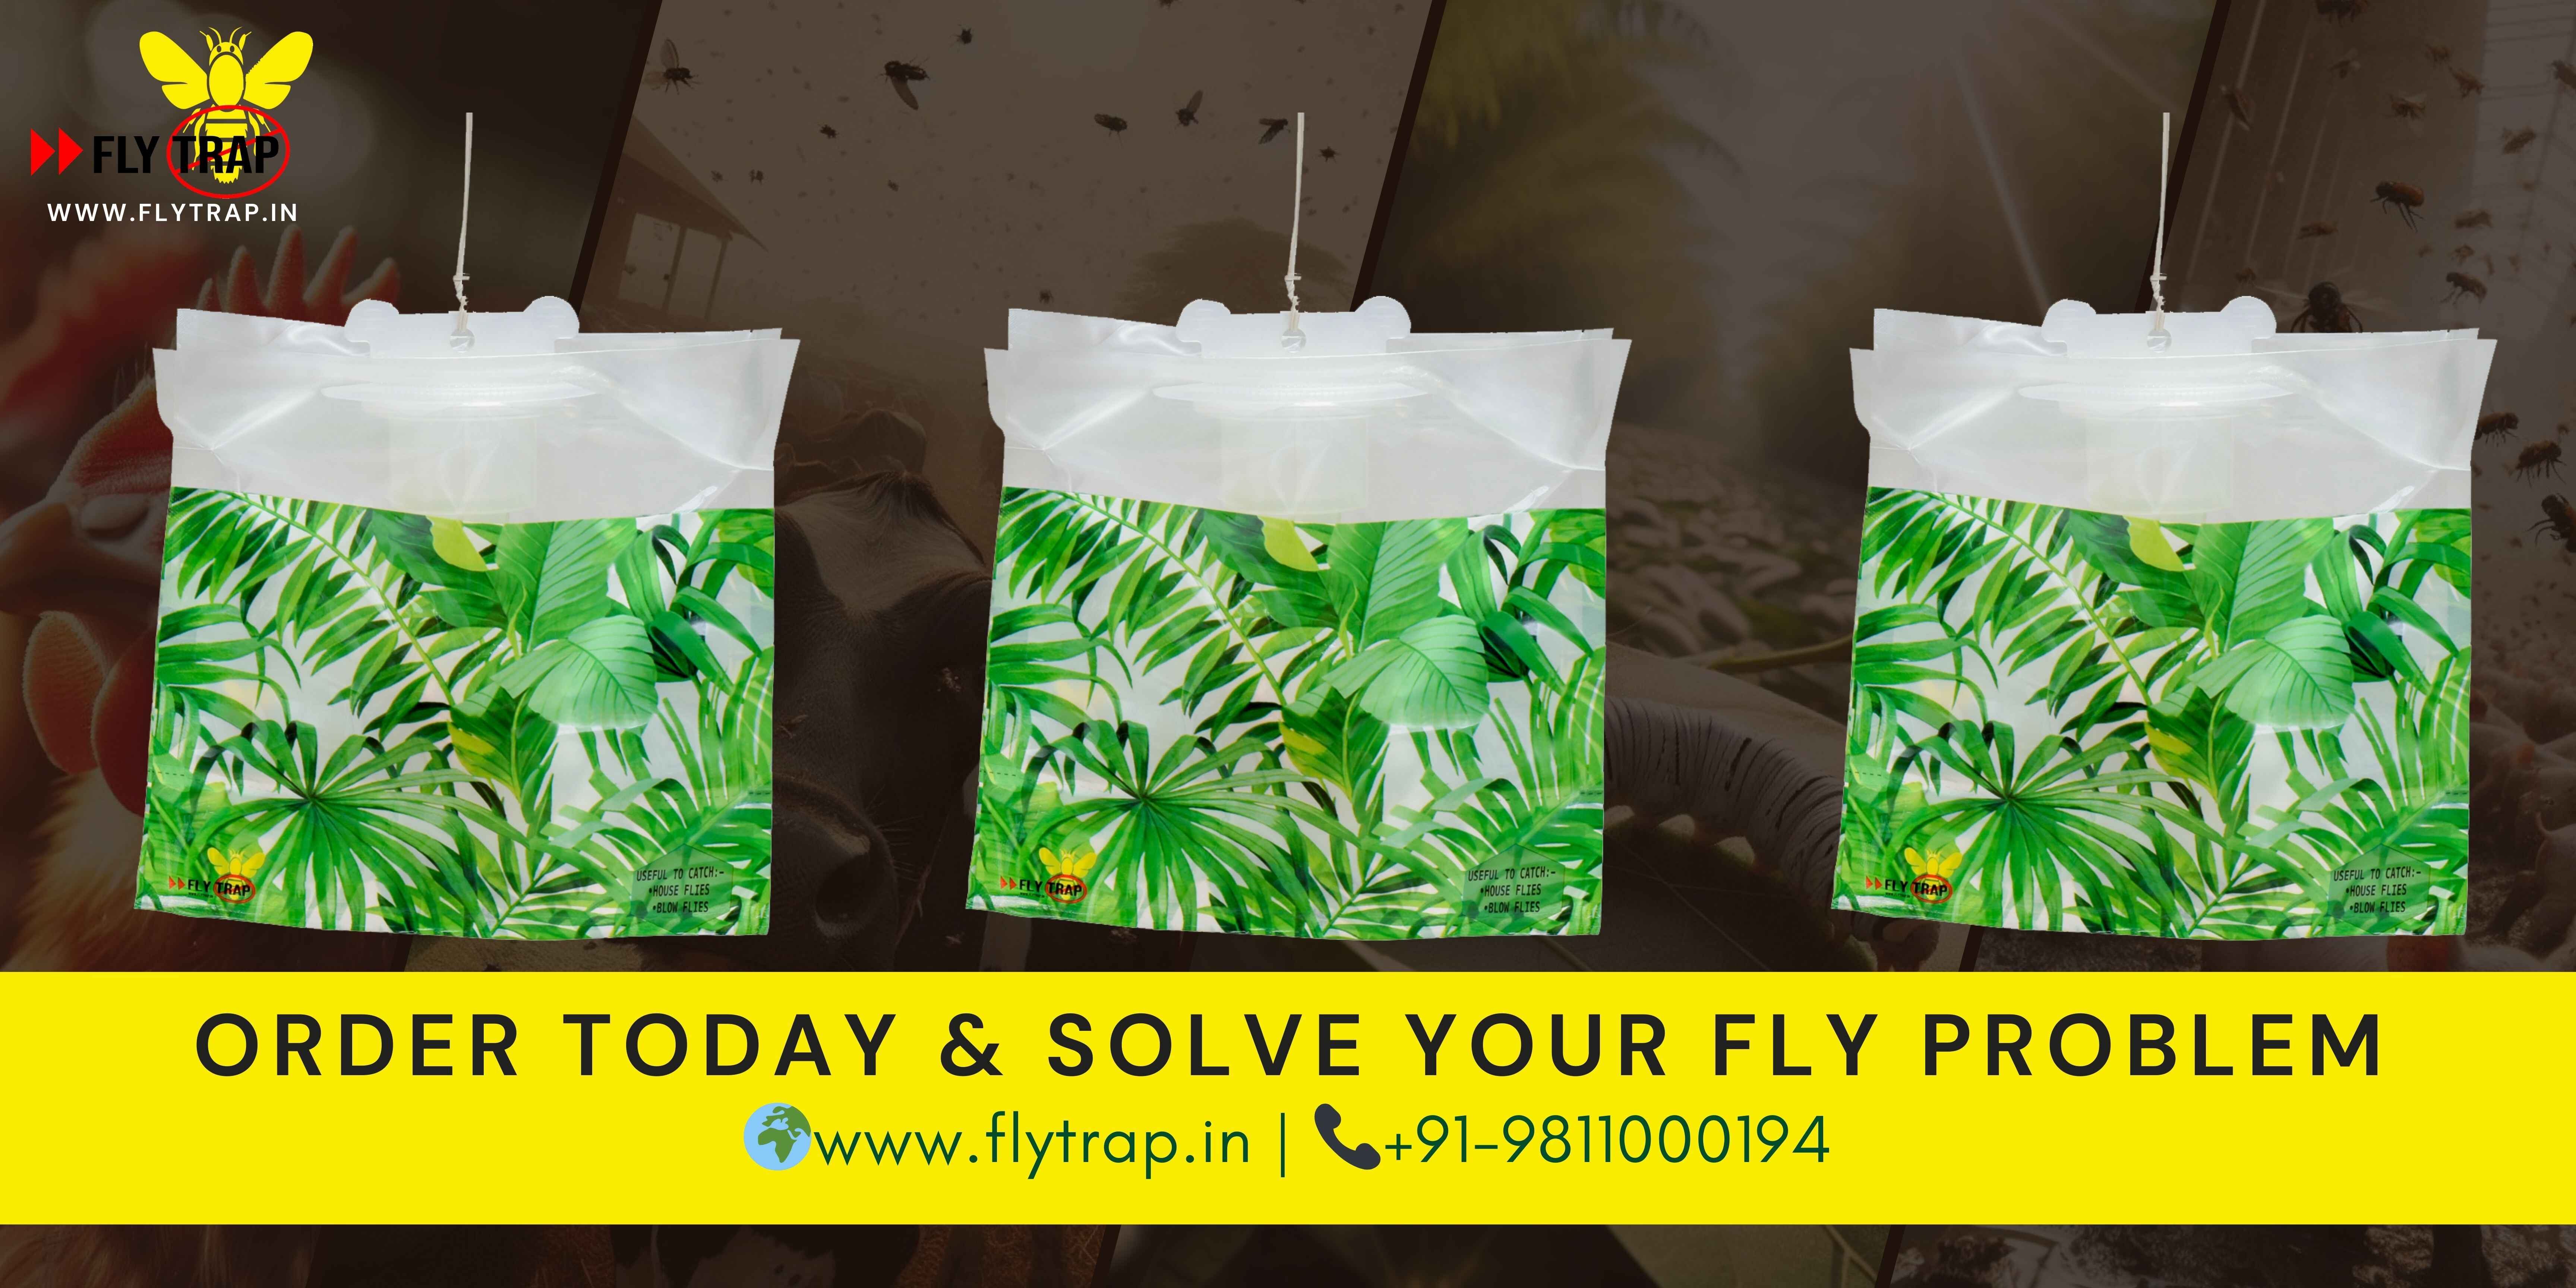 Order Organic Disposable Fly Traps today and Solve Your Fly Problems